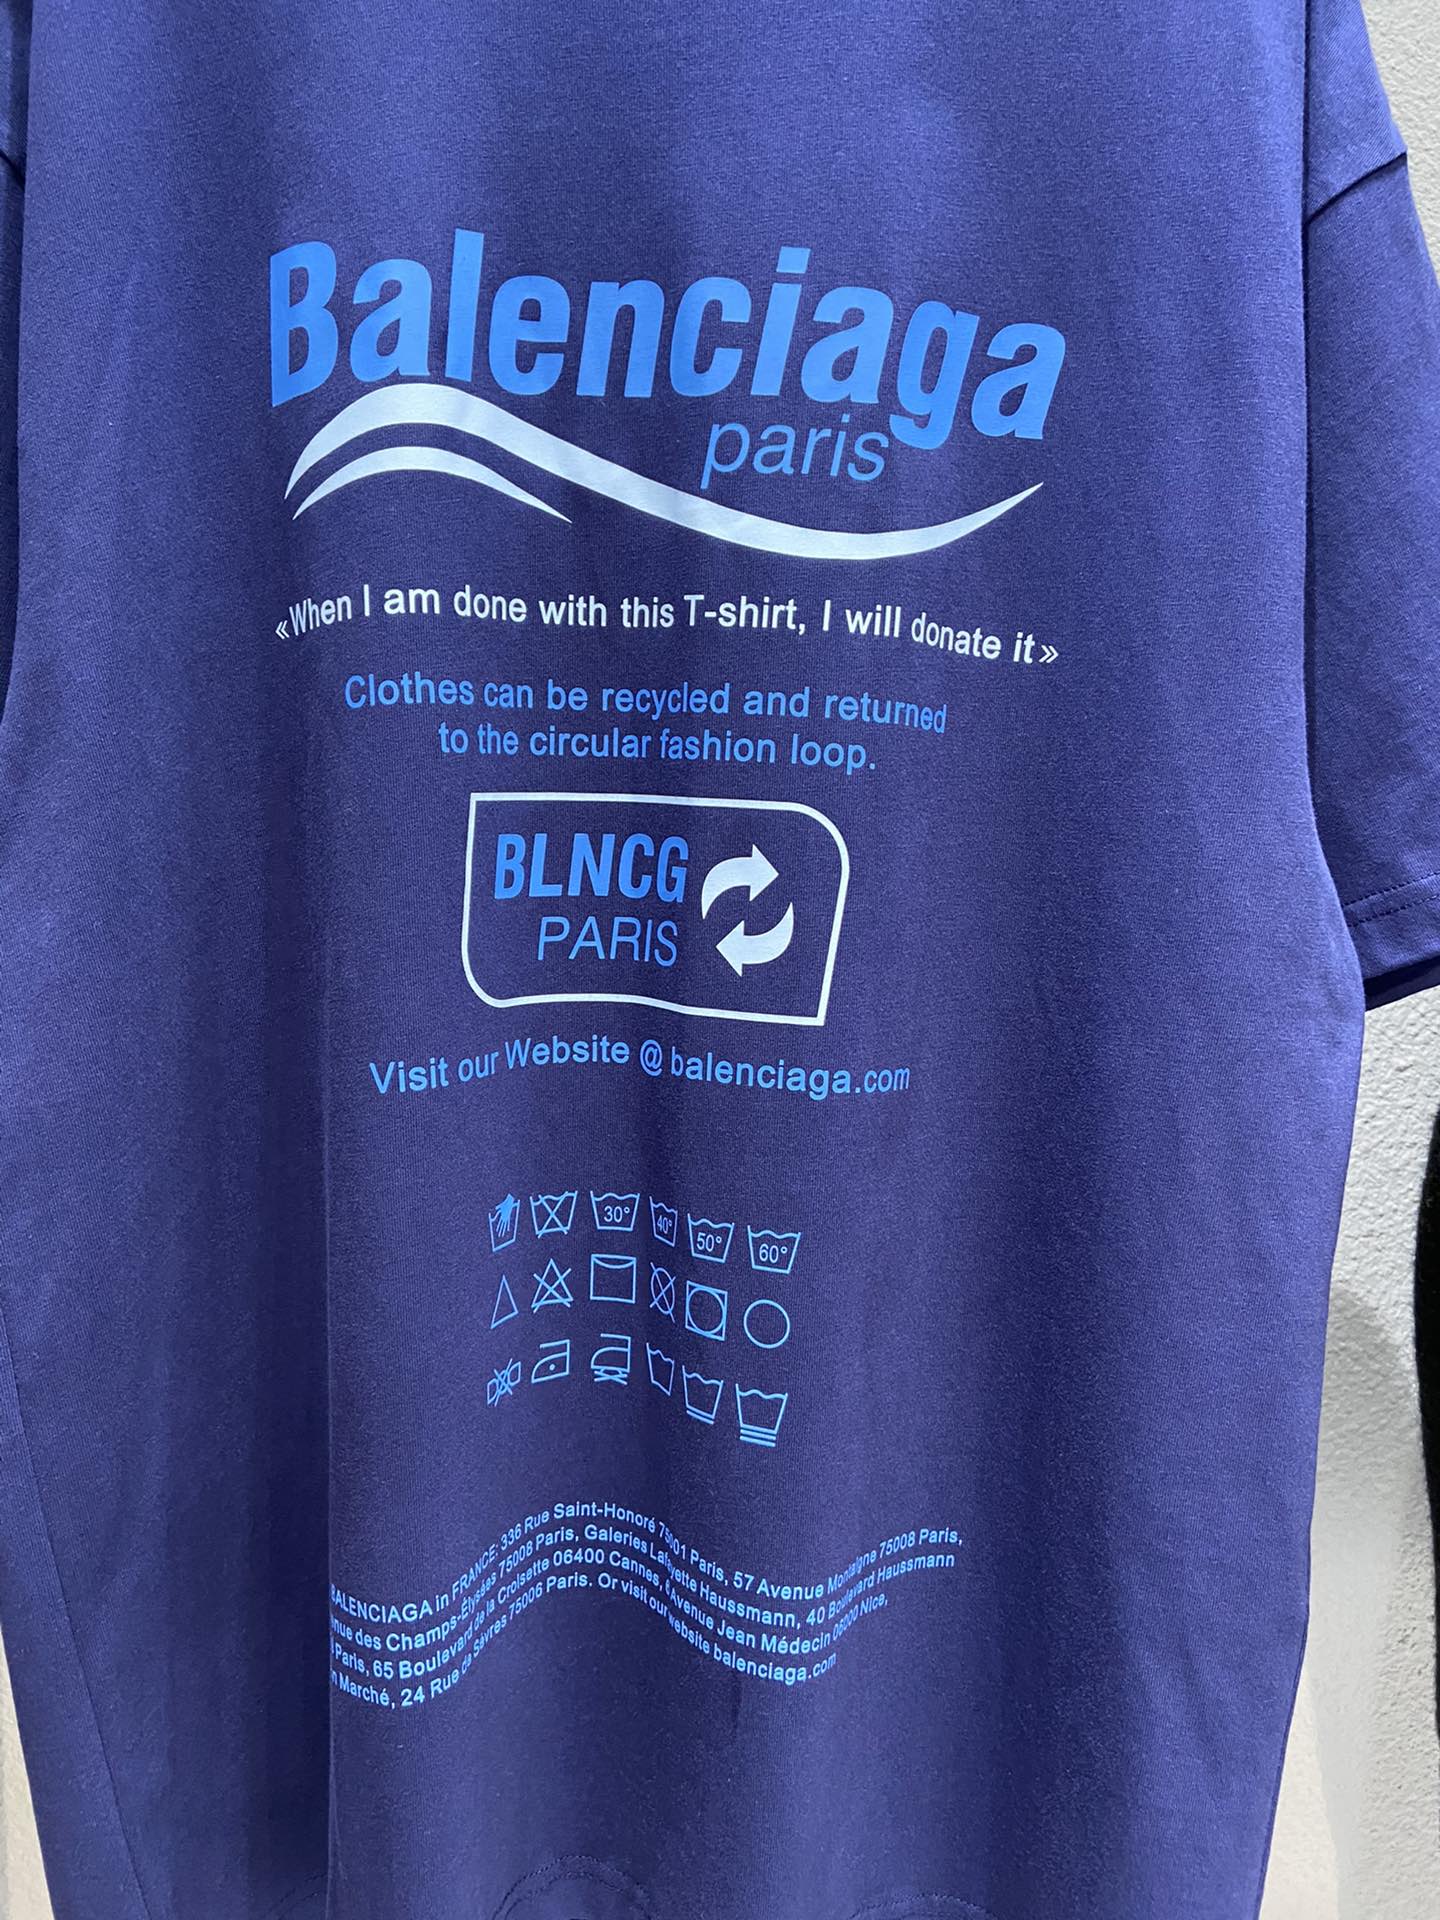 Balenciaga T-Shirt Dry Cleaning Boxy in Blue